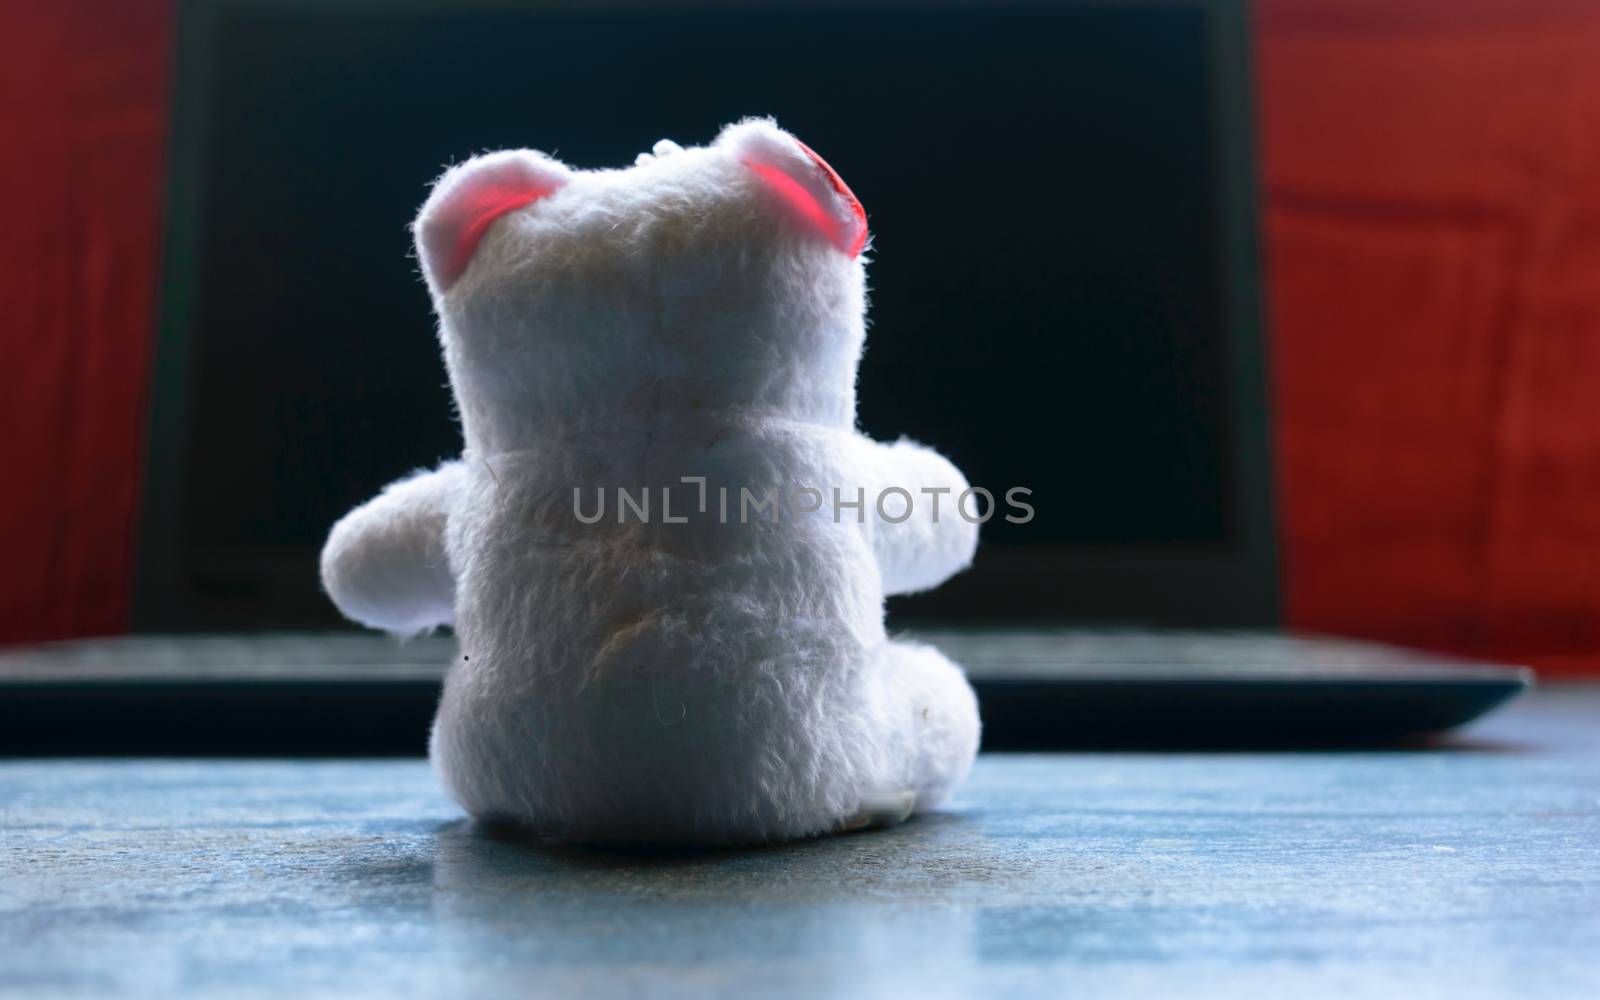 Teddy bear sitting in front of laptop computer device. Still Life. Child using digital technology. Conceptual background concept. Modern childhood education theme. Copy space room for text for massage.